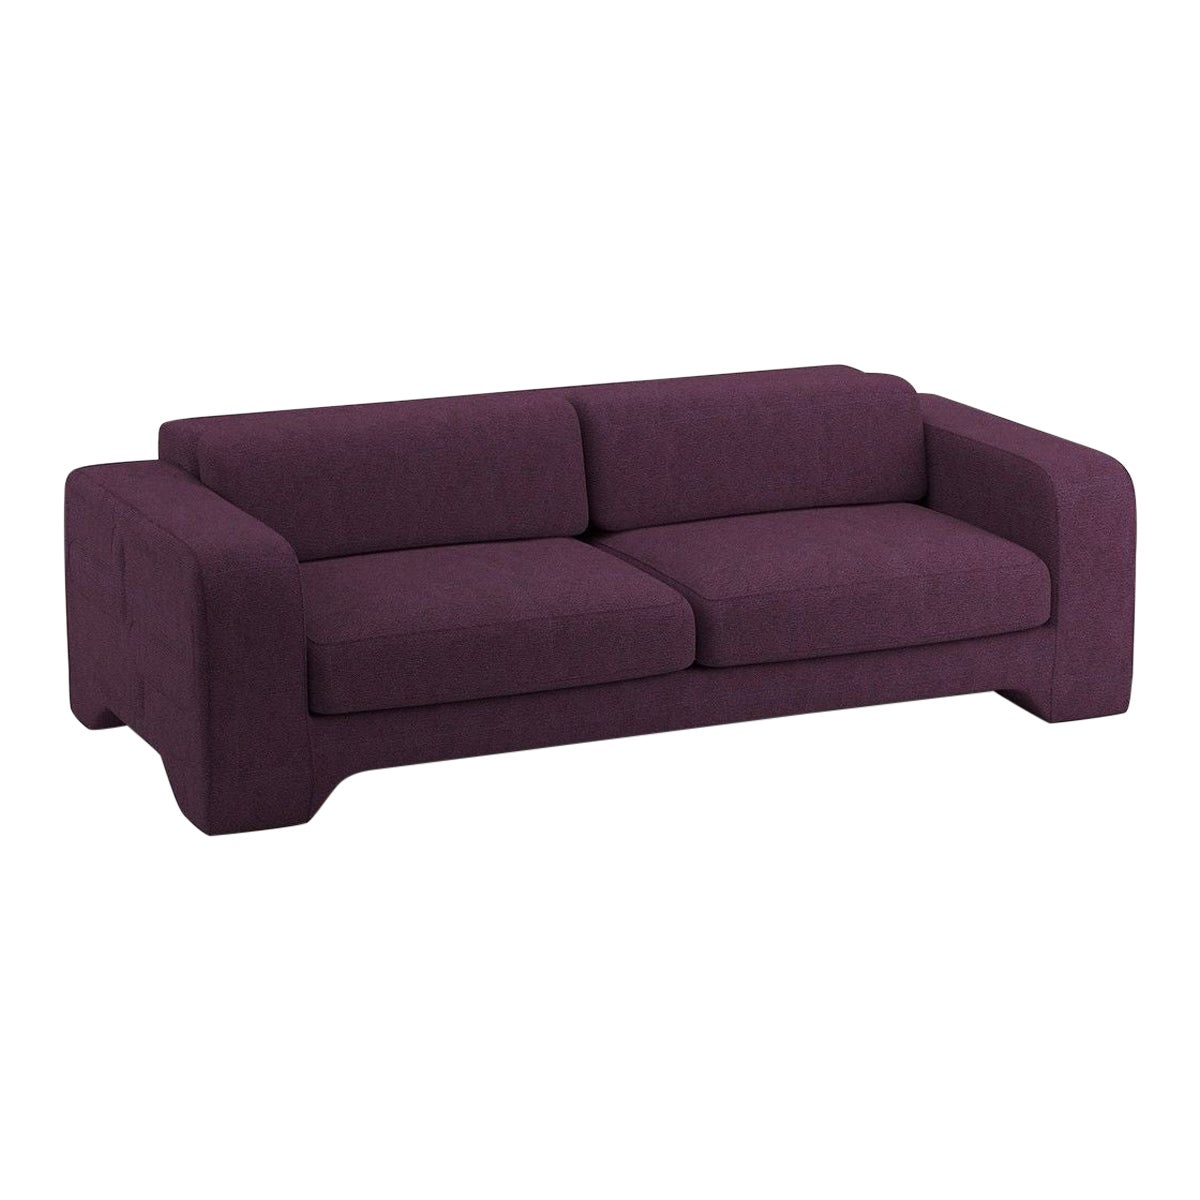 Popus Editions Giovanna 4 Seater Sofa in Eggplant Megeve Fabric Knit Effect